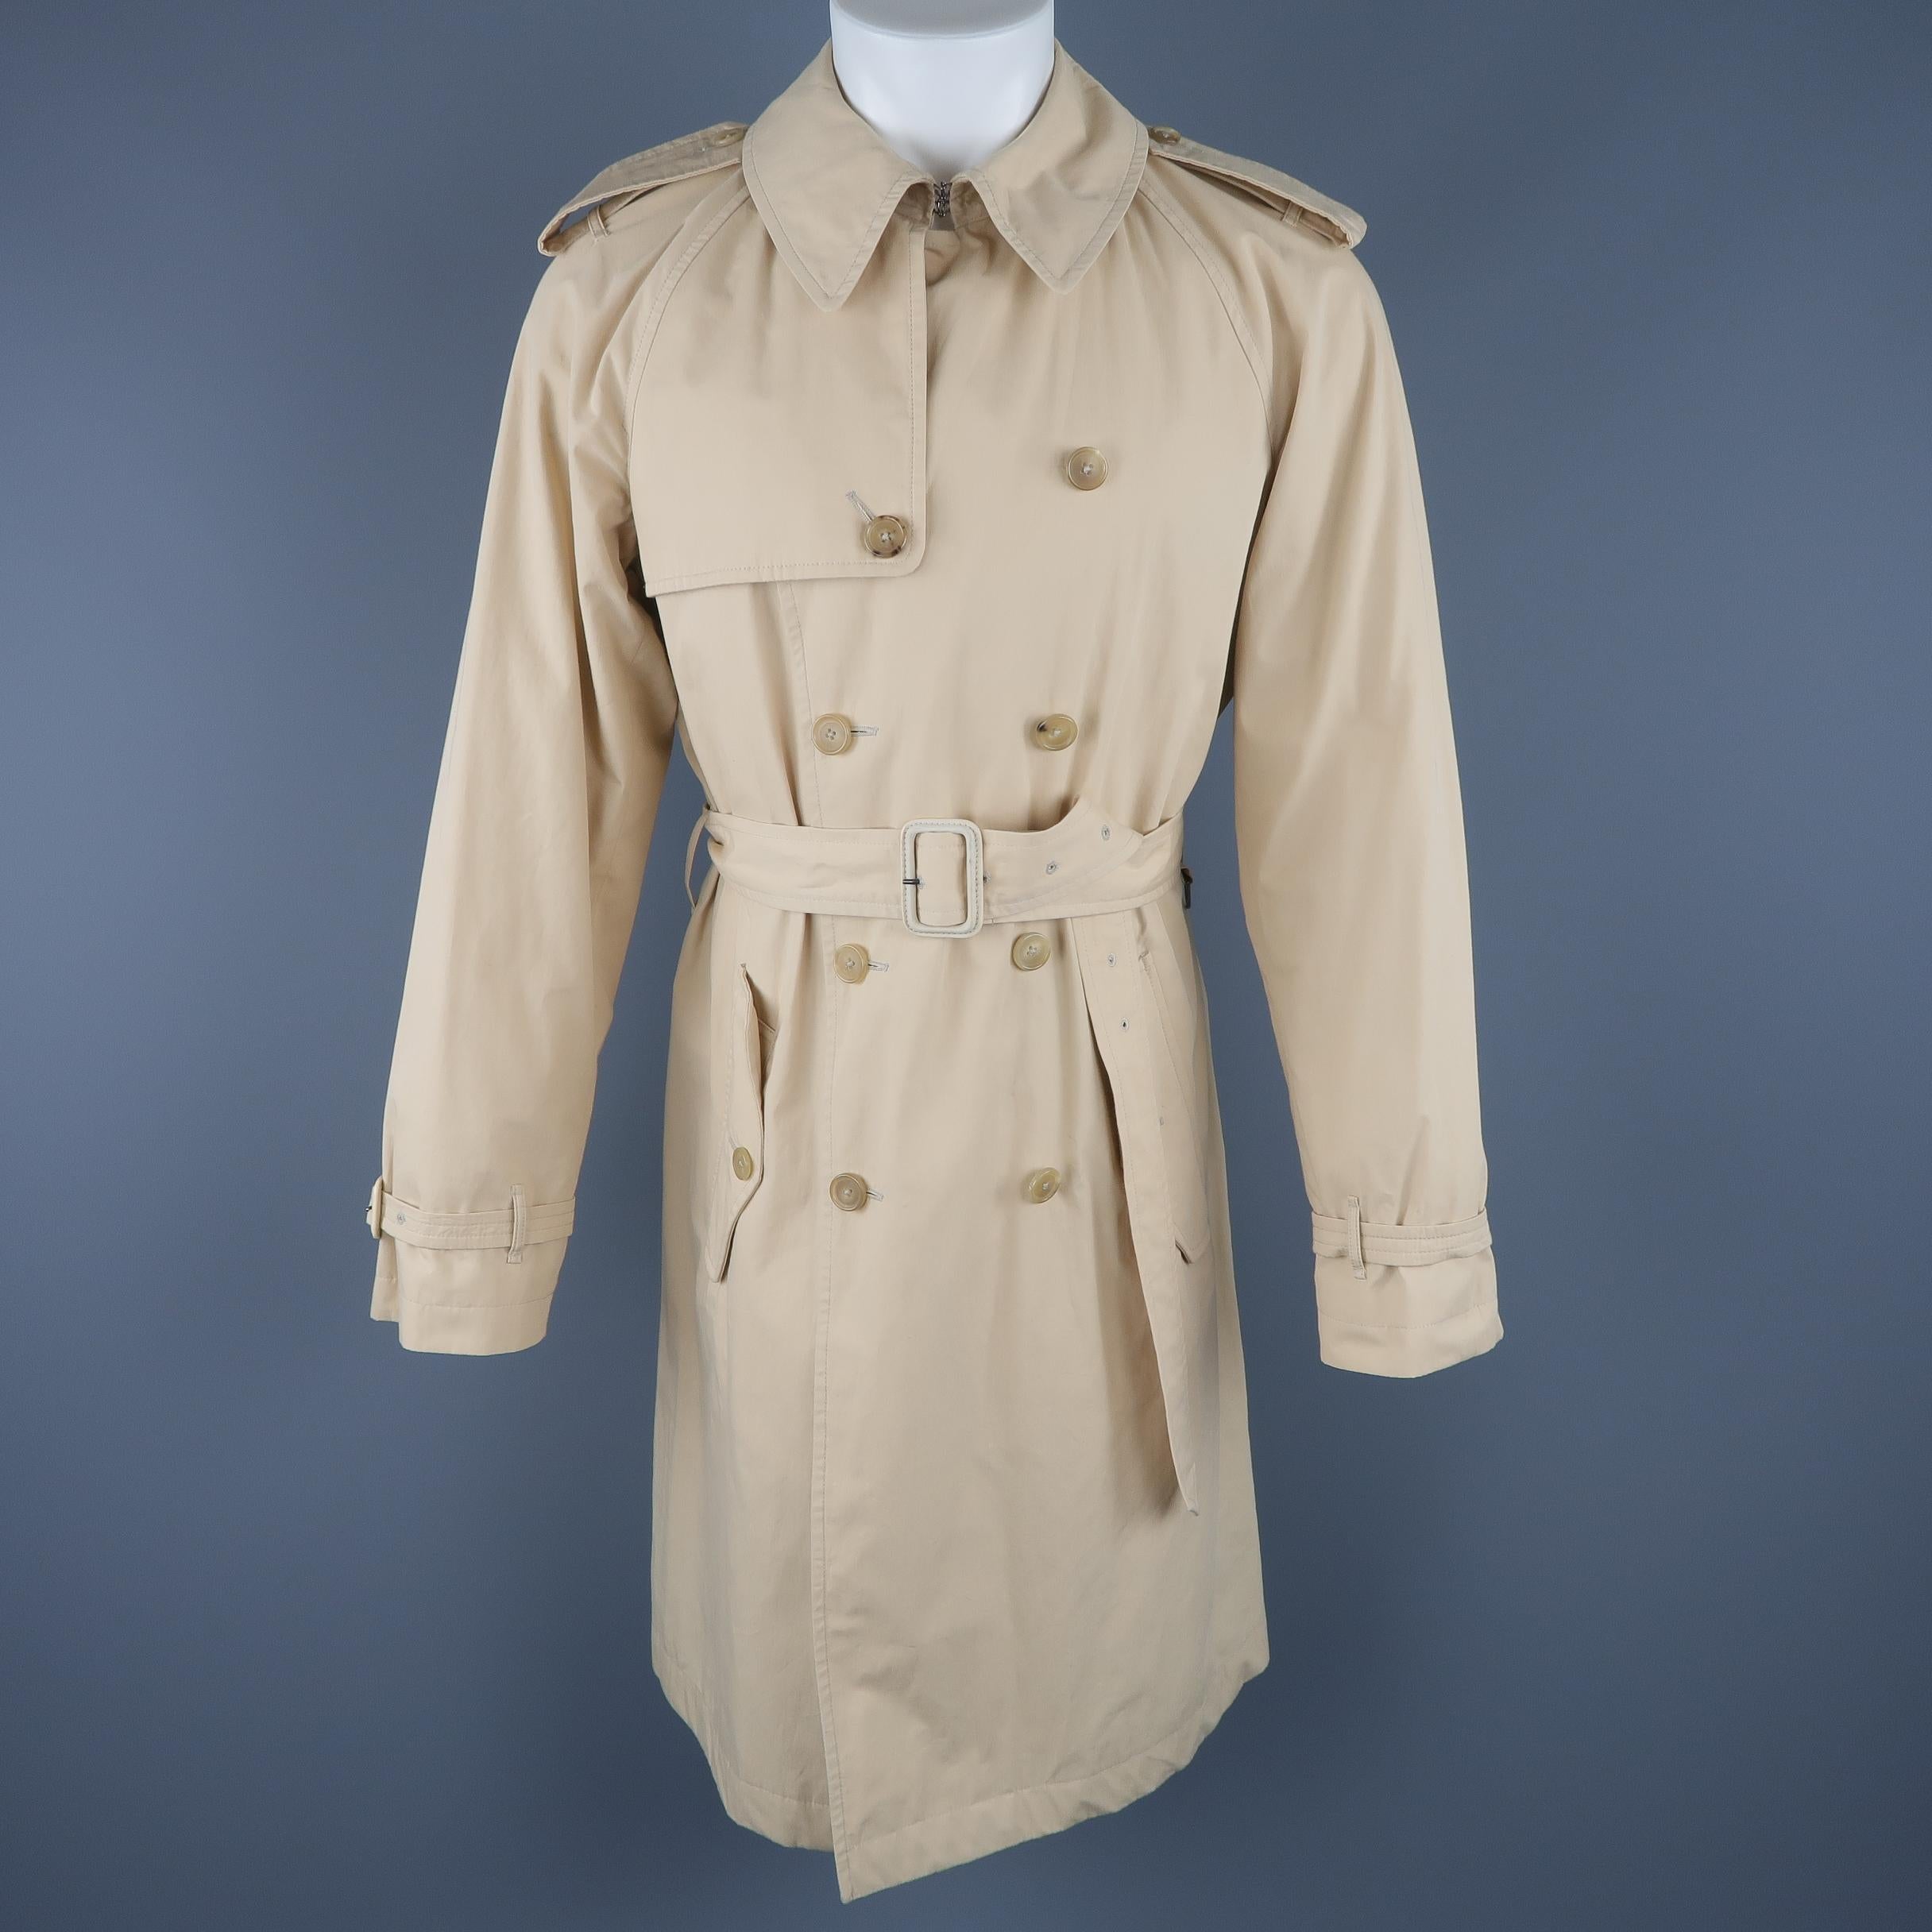 1308-ralph lauren-men’s classic trench winter single breasted cotton outerwear jacket